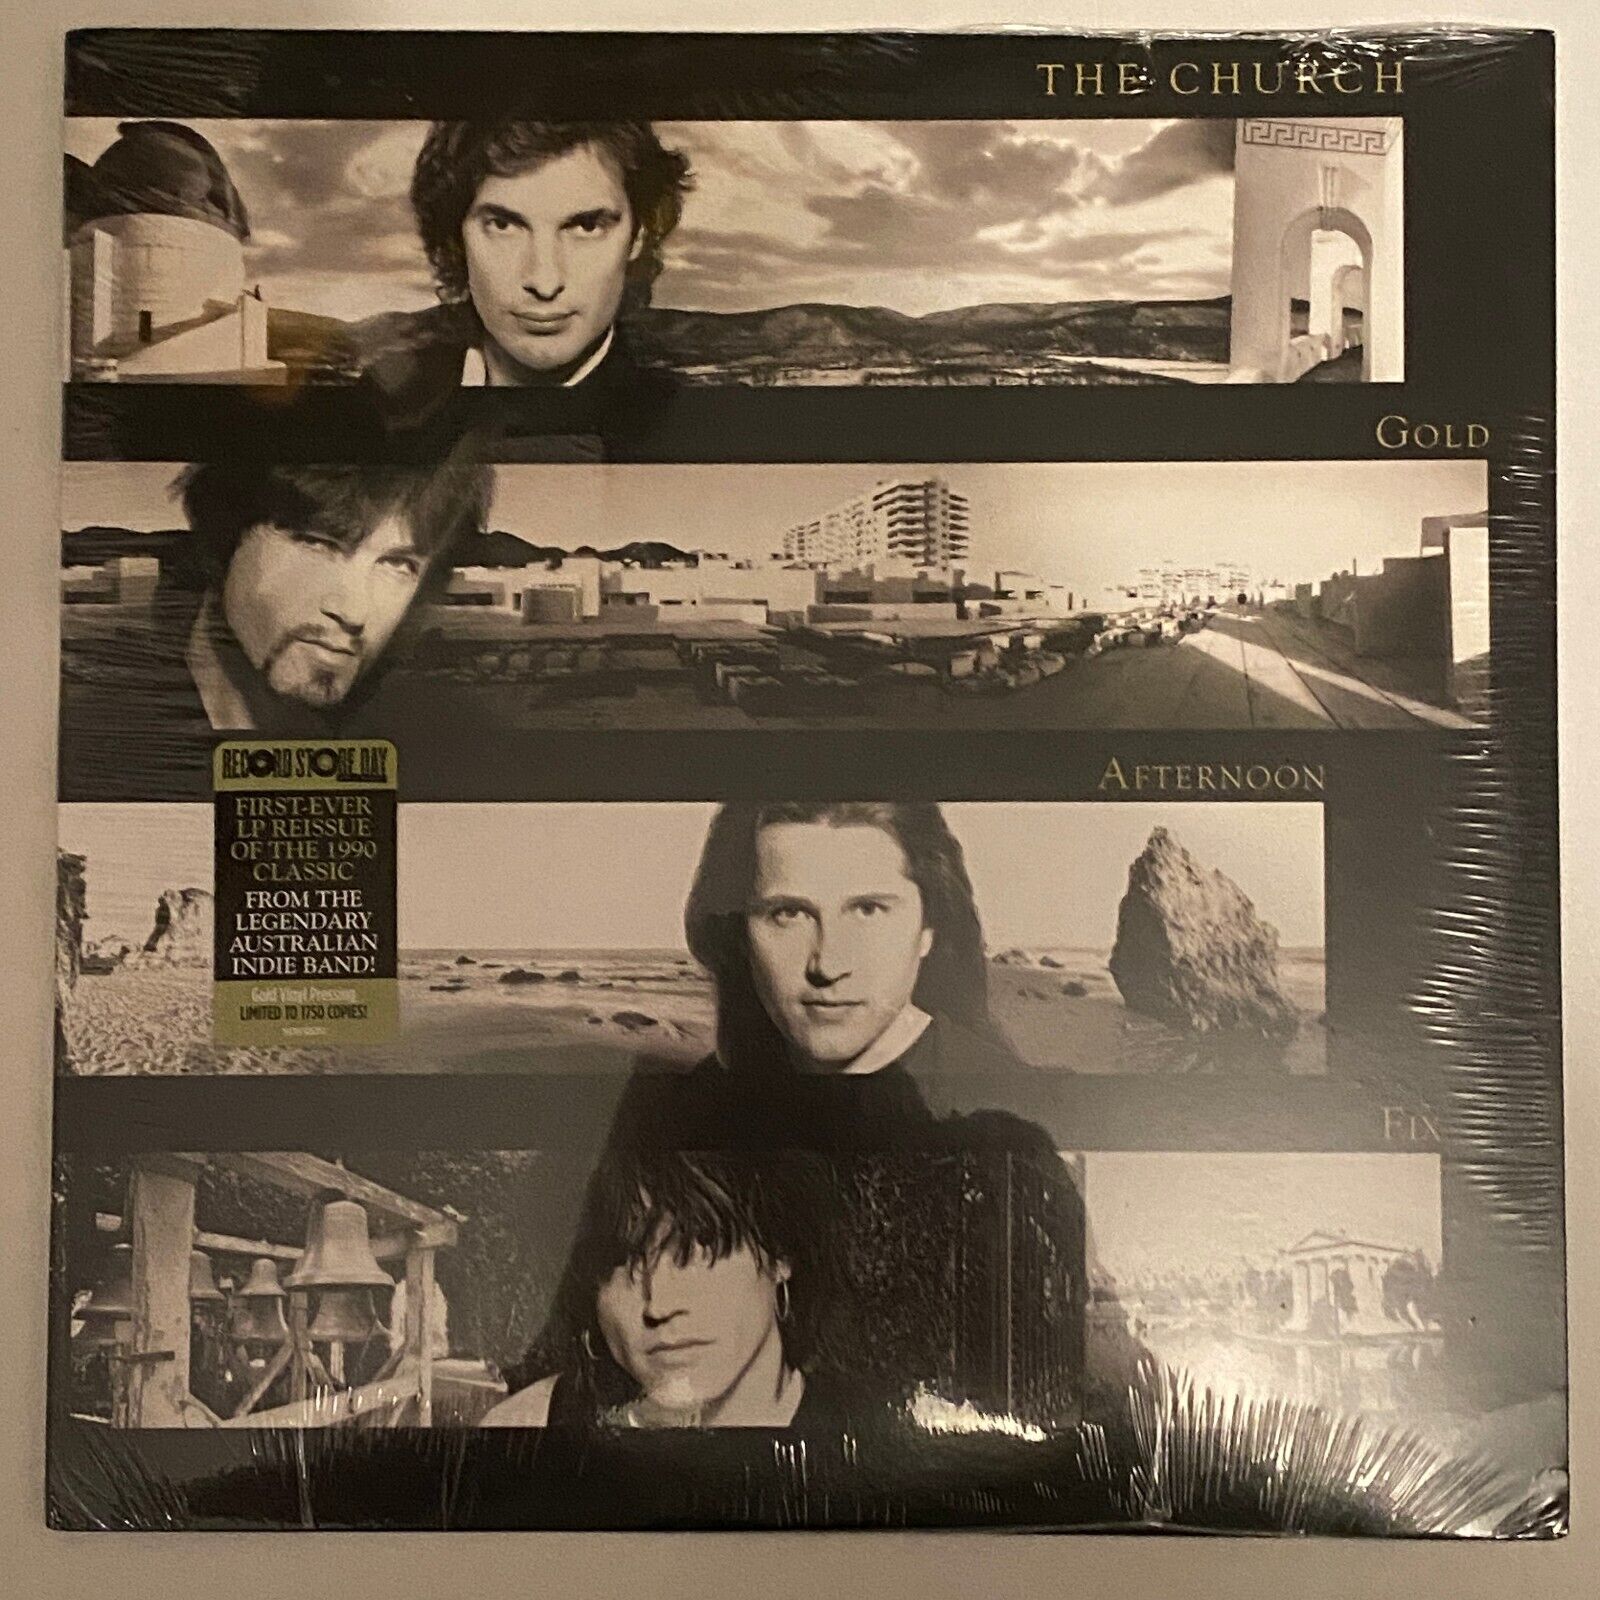 THE CHURCH - GOLD AFTERNOON FIX ALBUM GOLD VINYL RSD 2020 NEW & SEALED